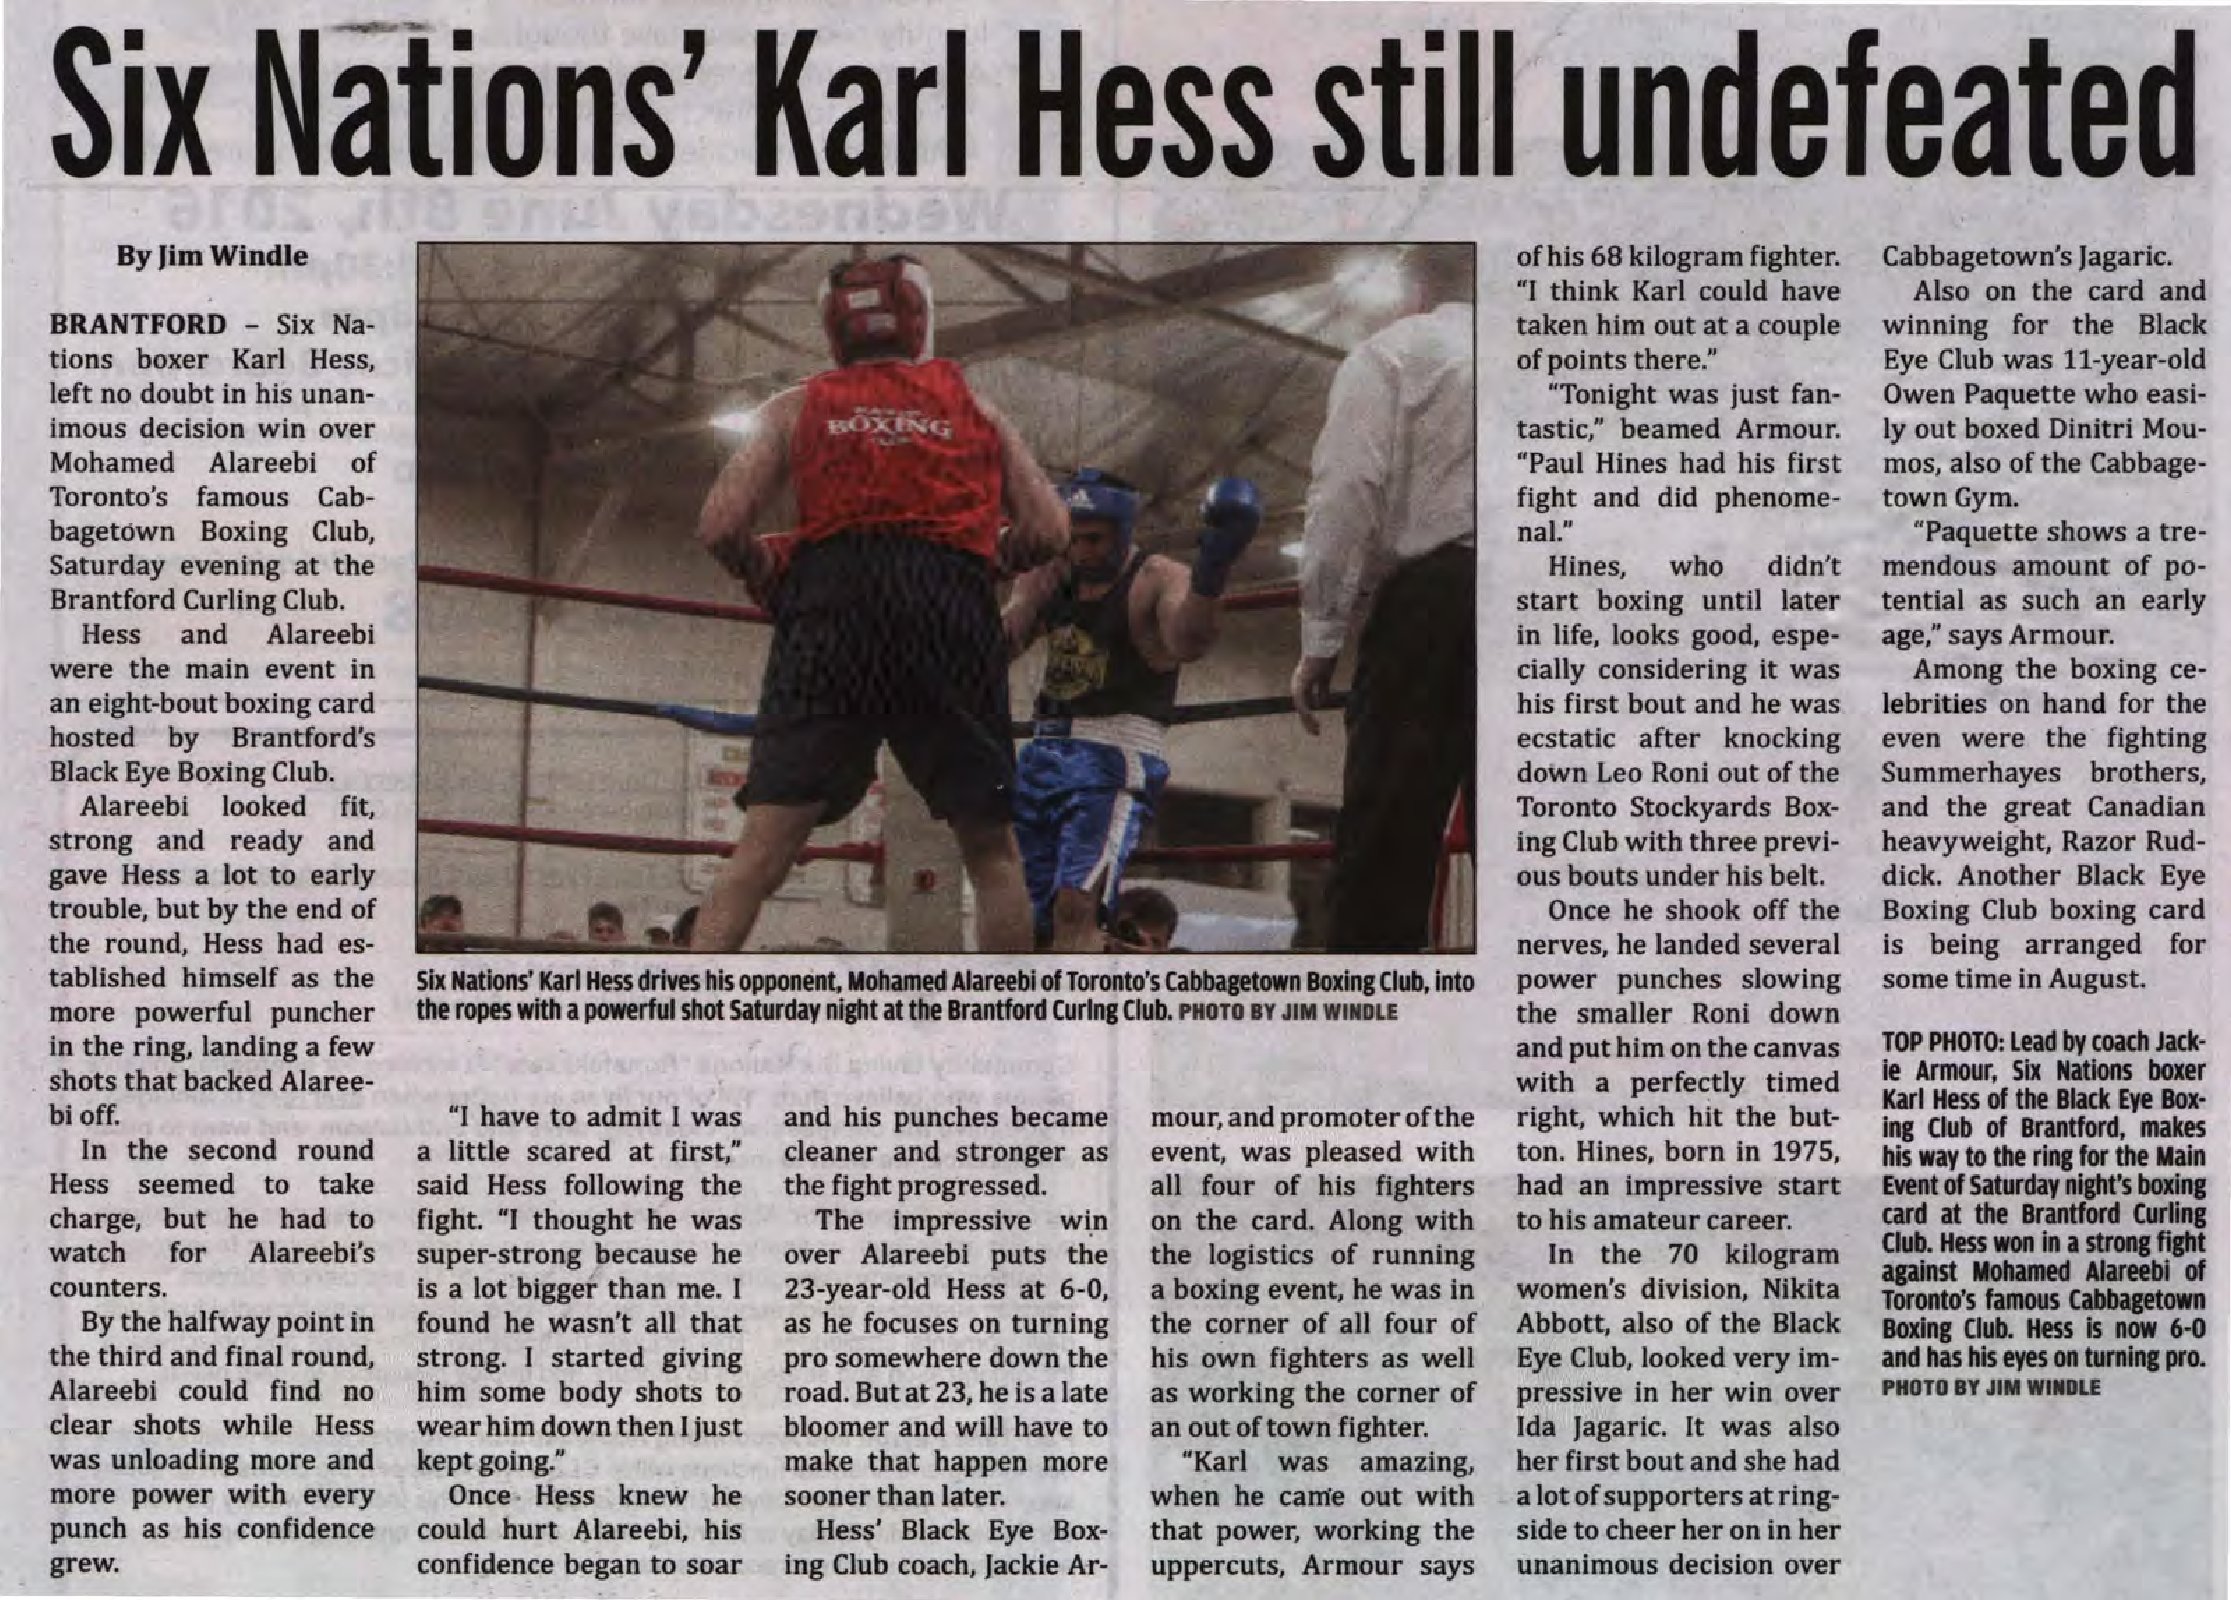 Six Nations' Karl Hess still undefeated